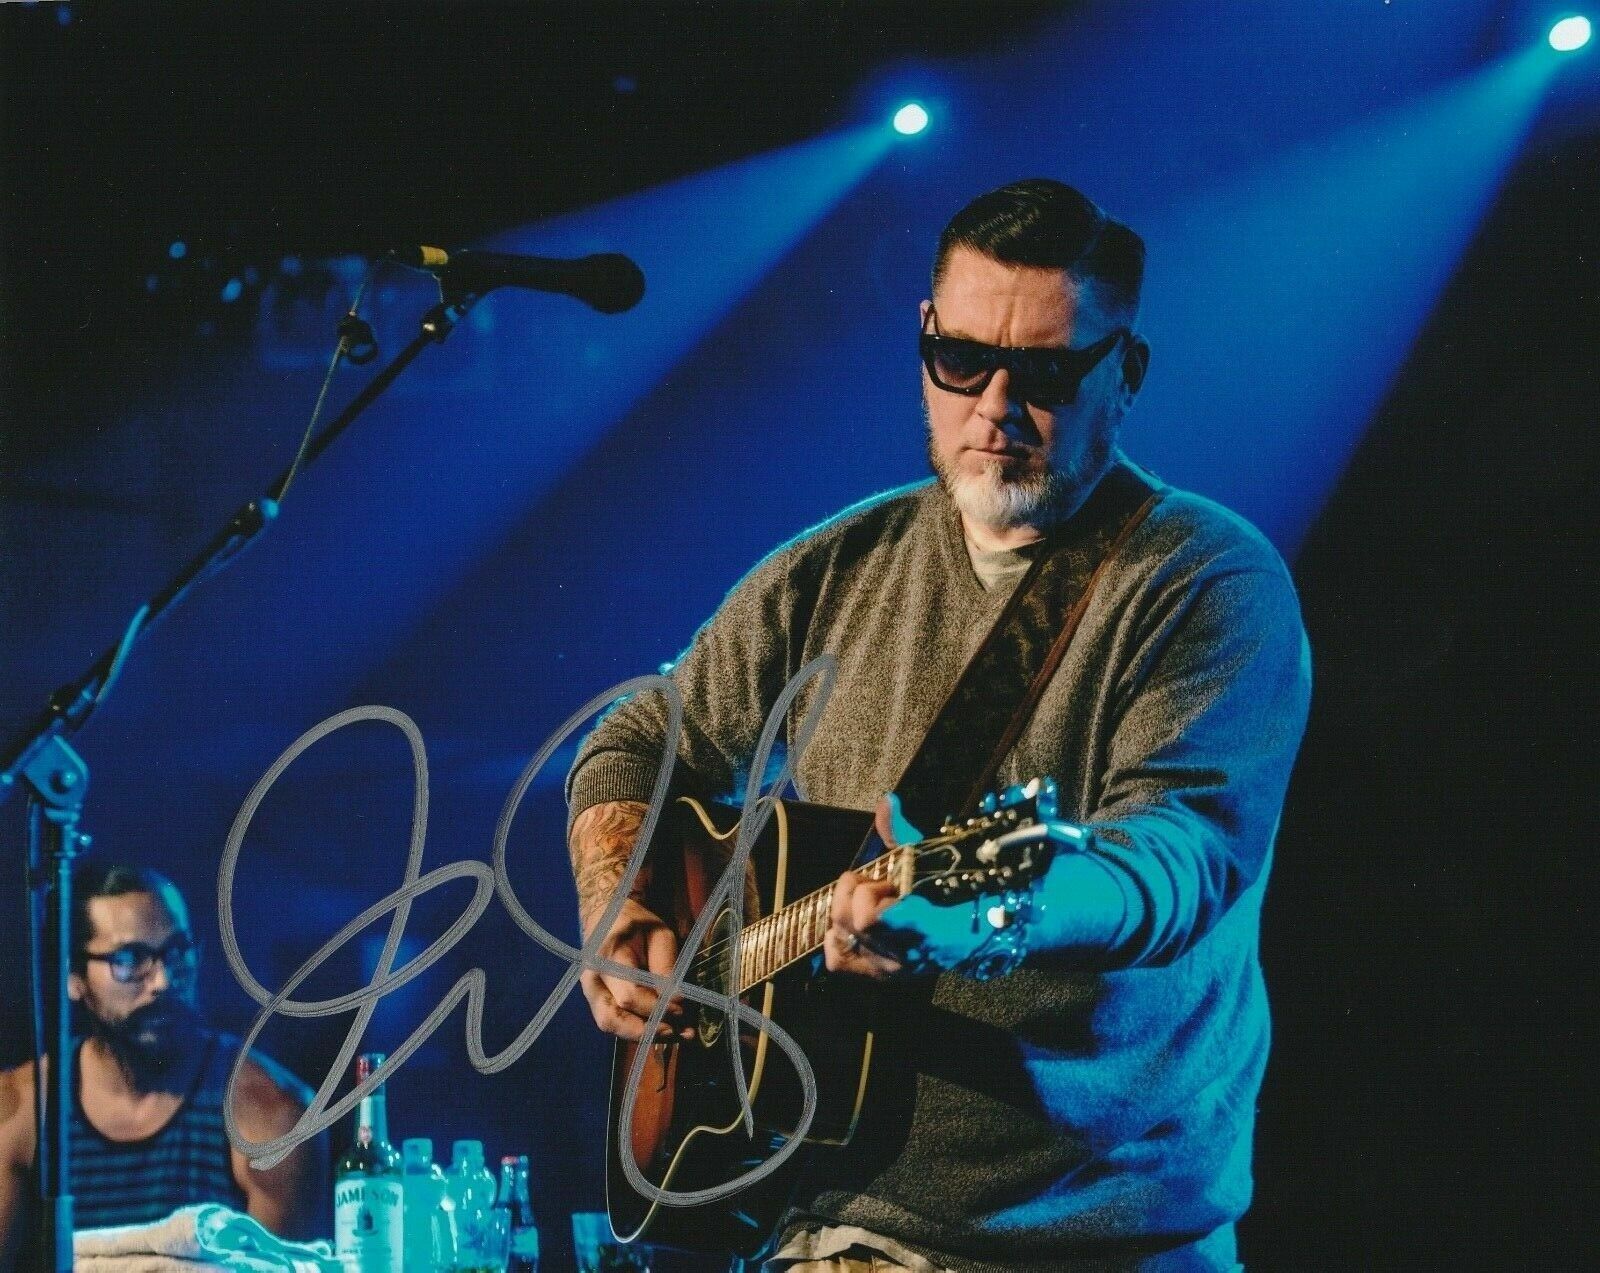 Everlast Autographed Signed 8x10 Photo Poster painting REPRINT